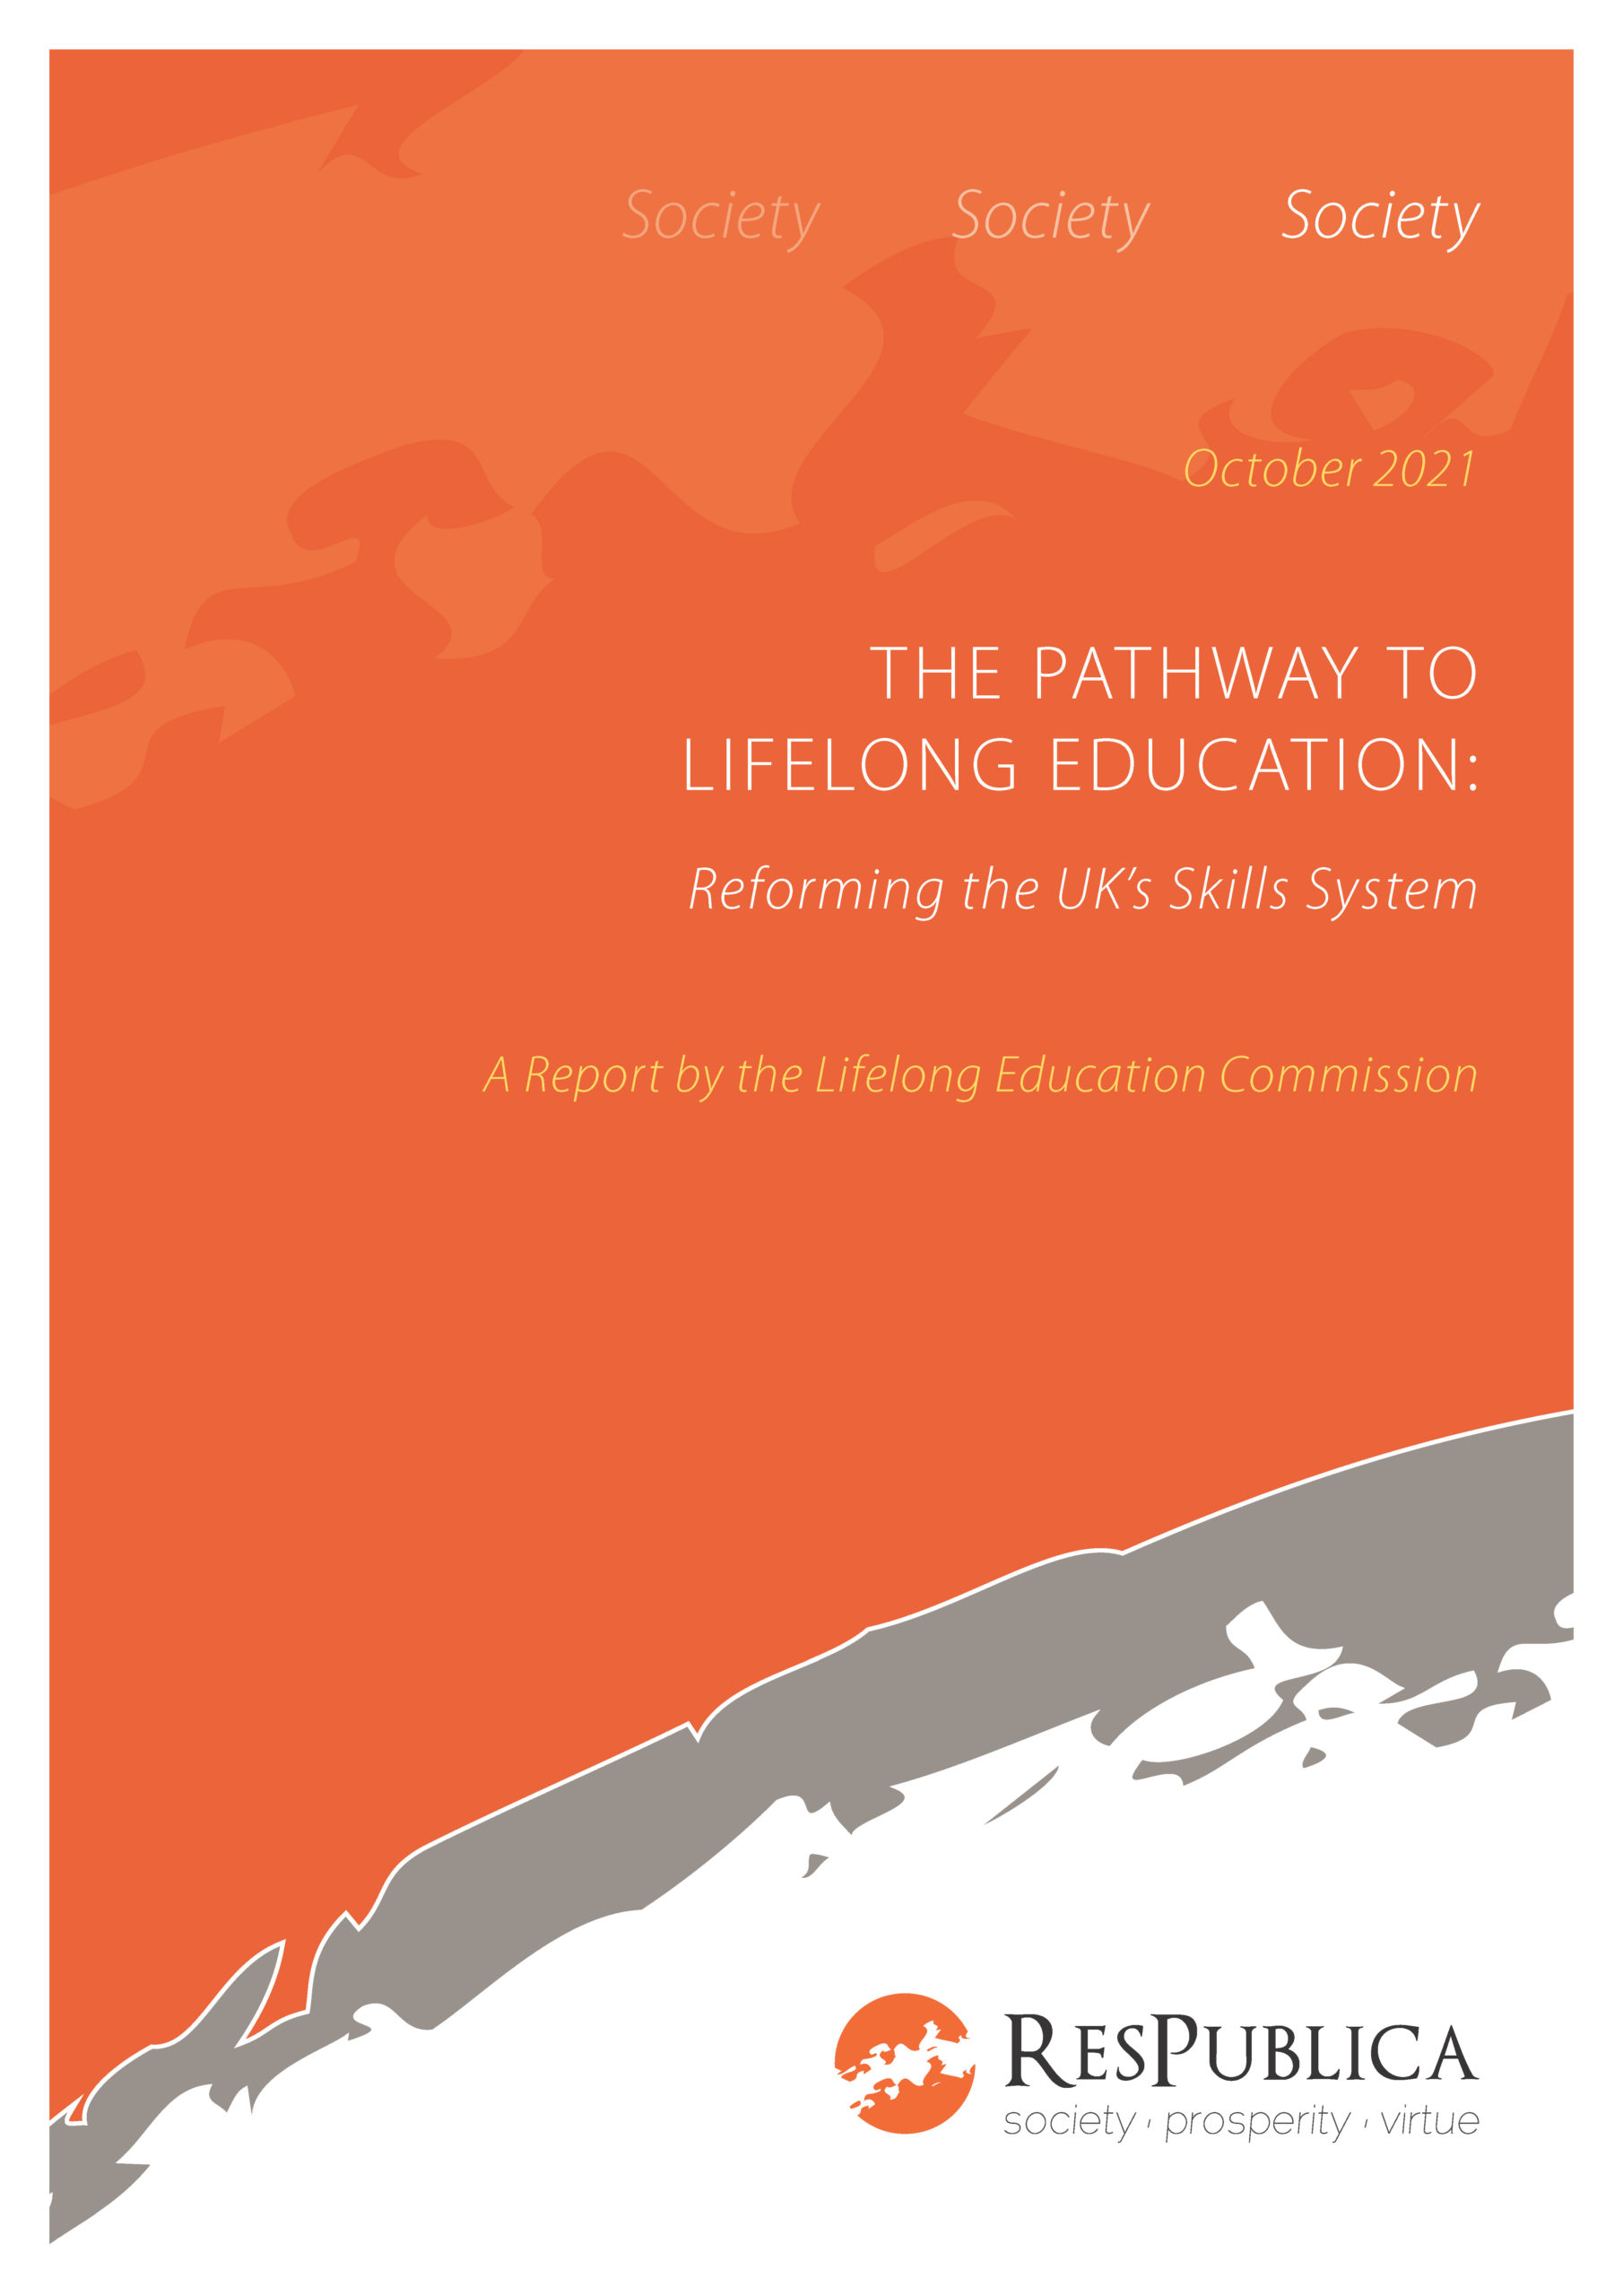 The Pathway to Lifelong Education